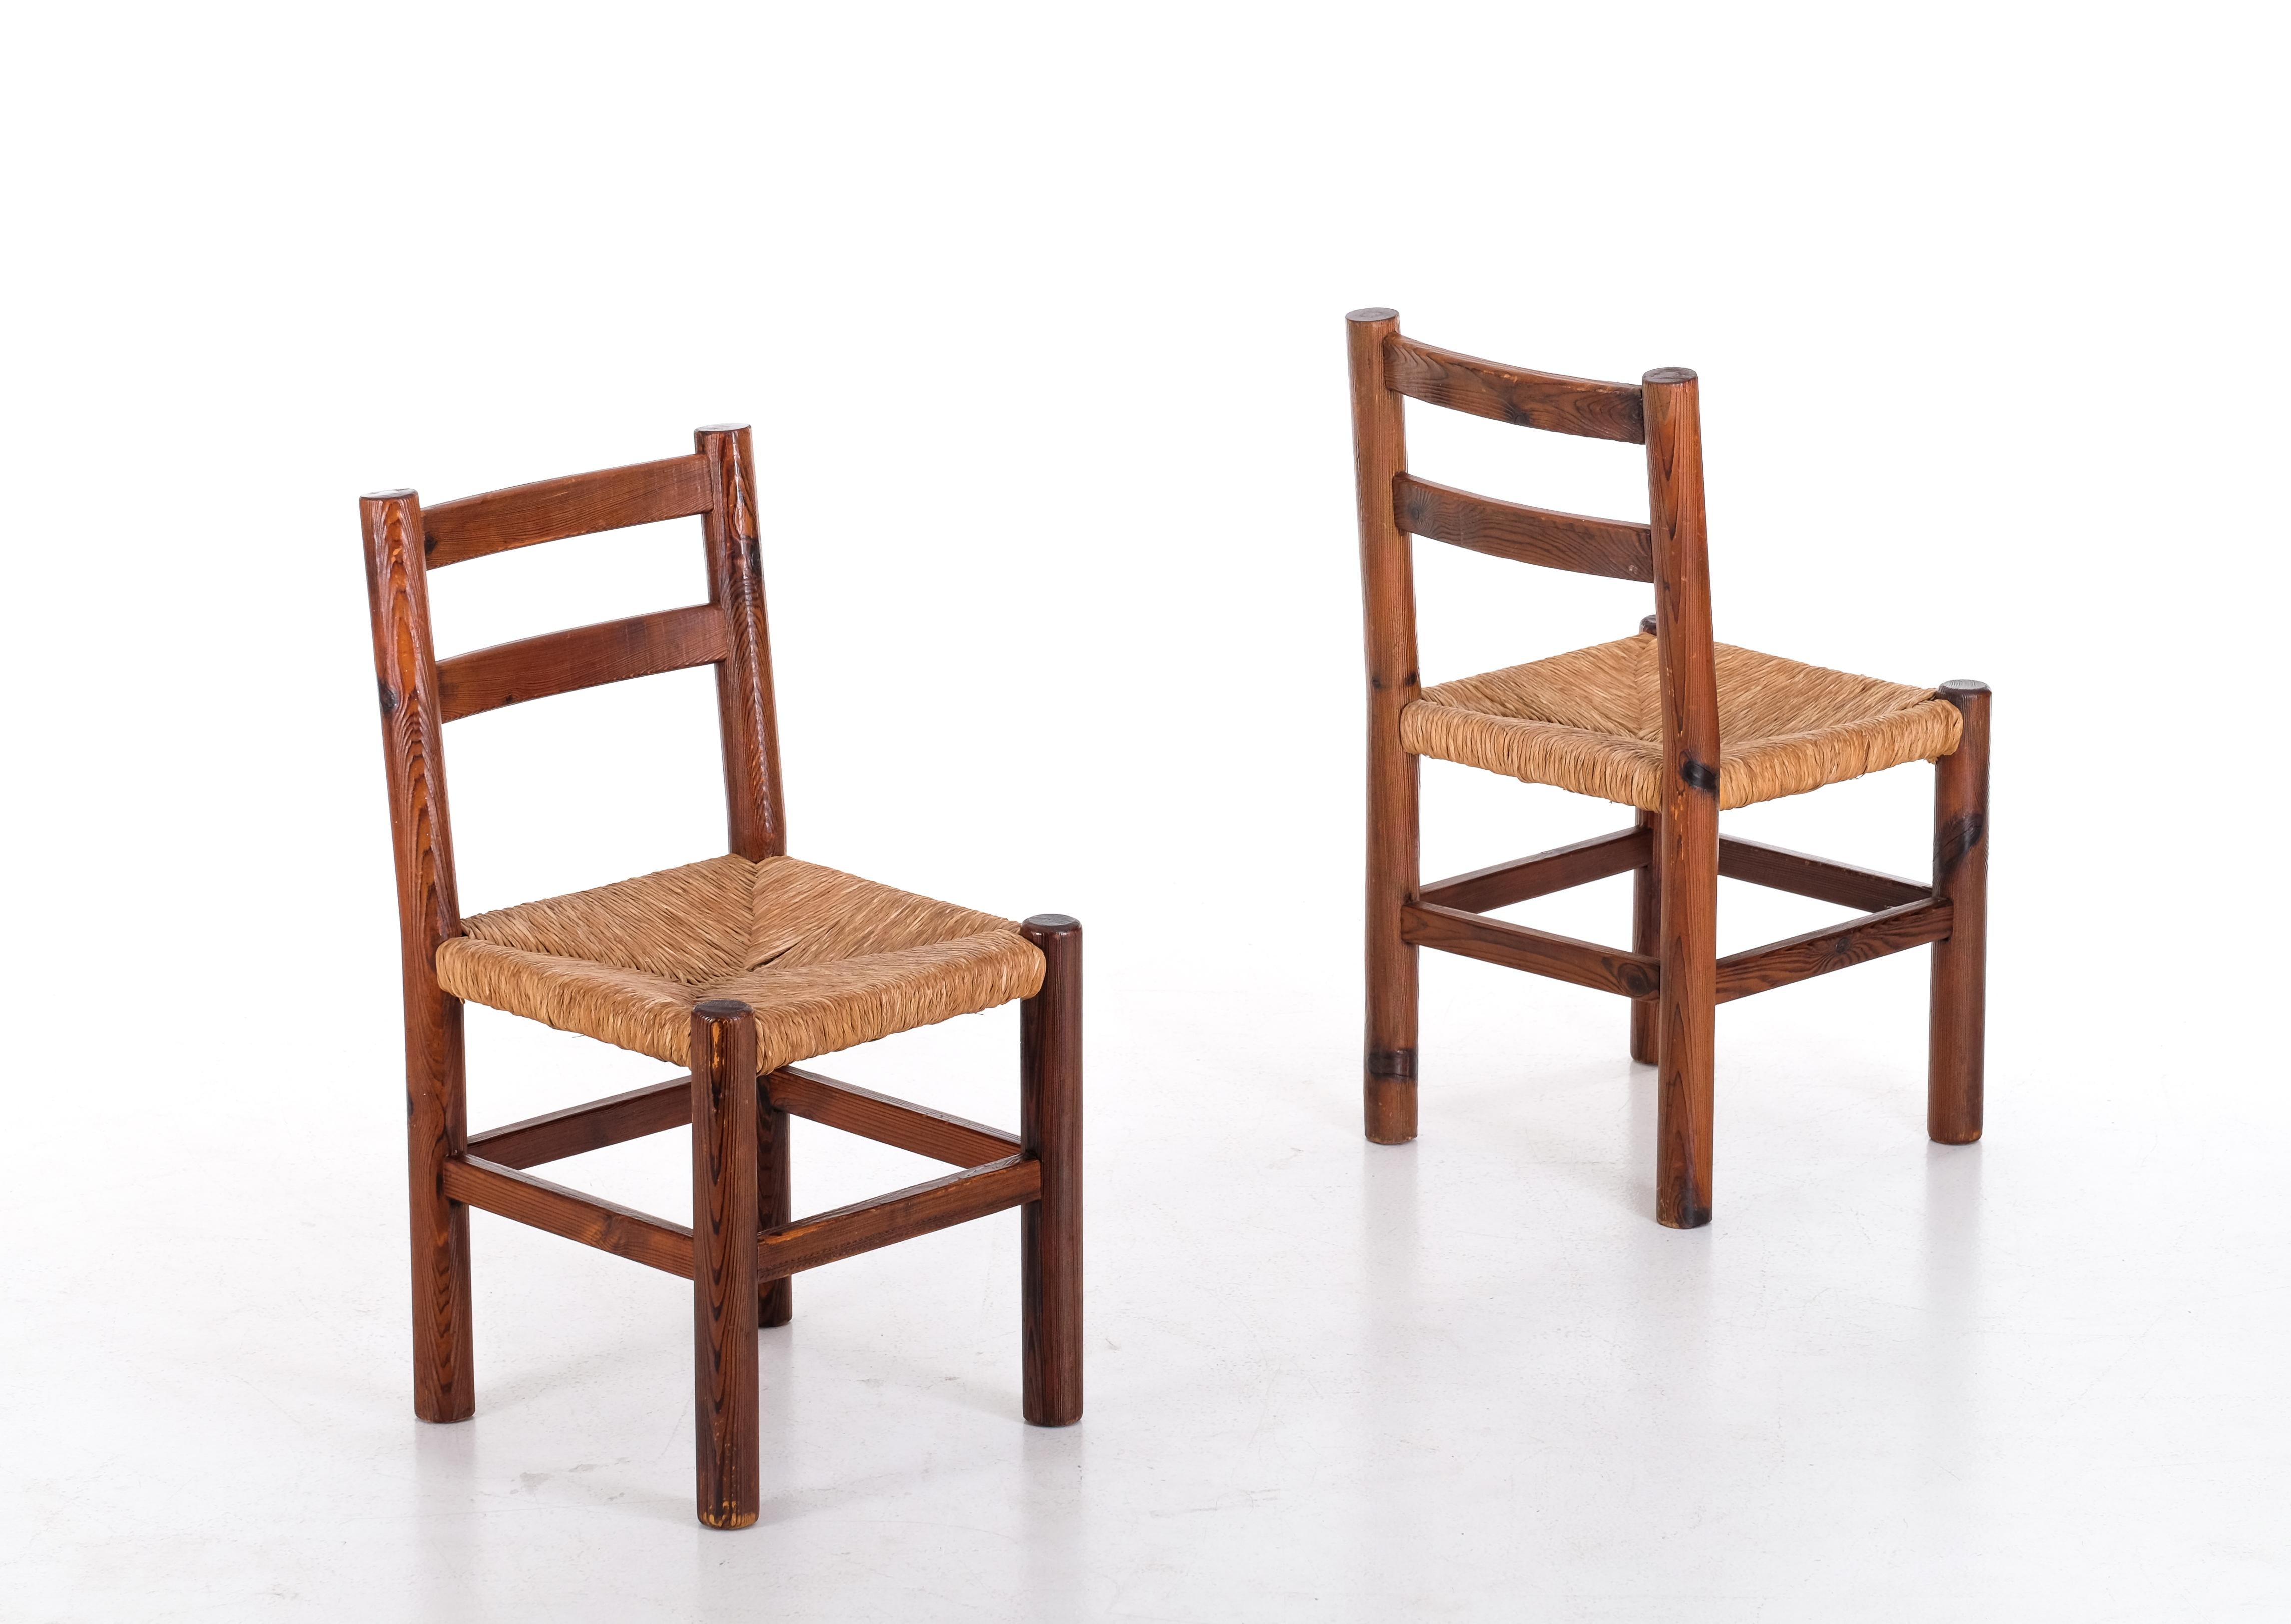 Set of 4 chairs in stained pine, 1960s.